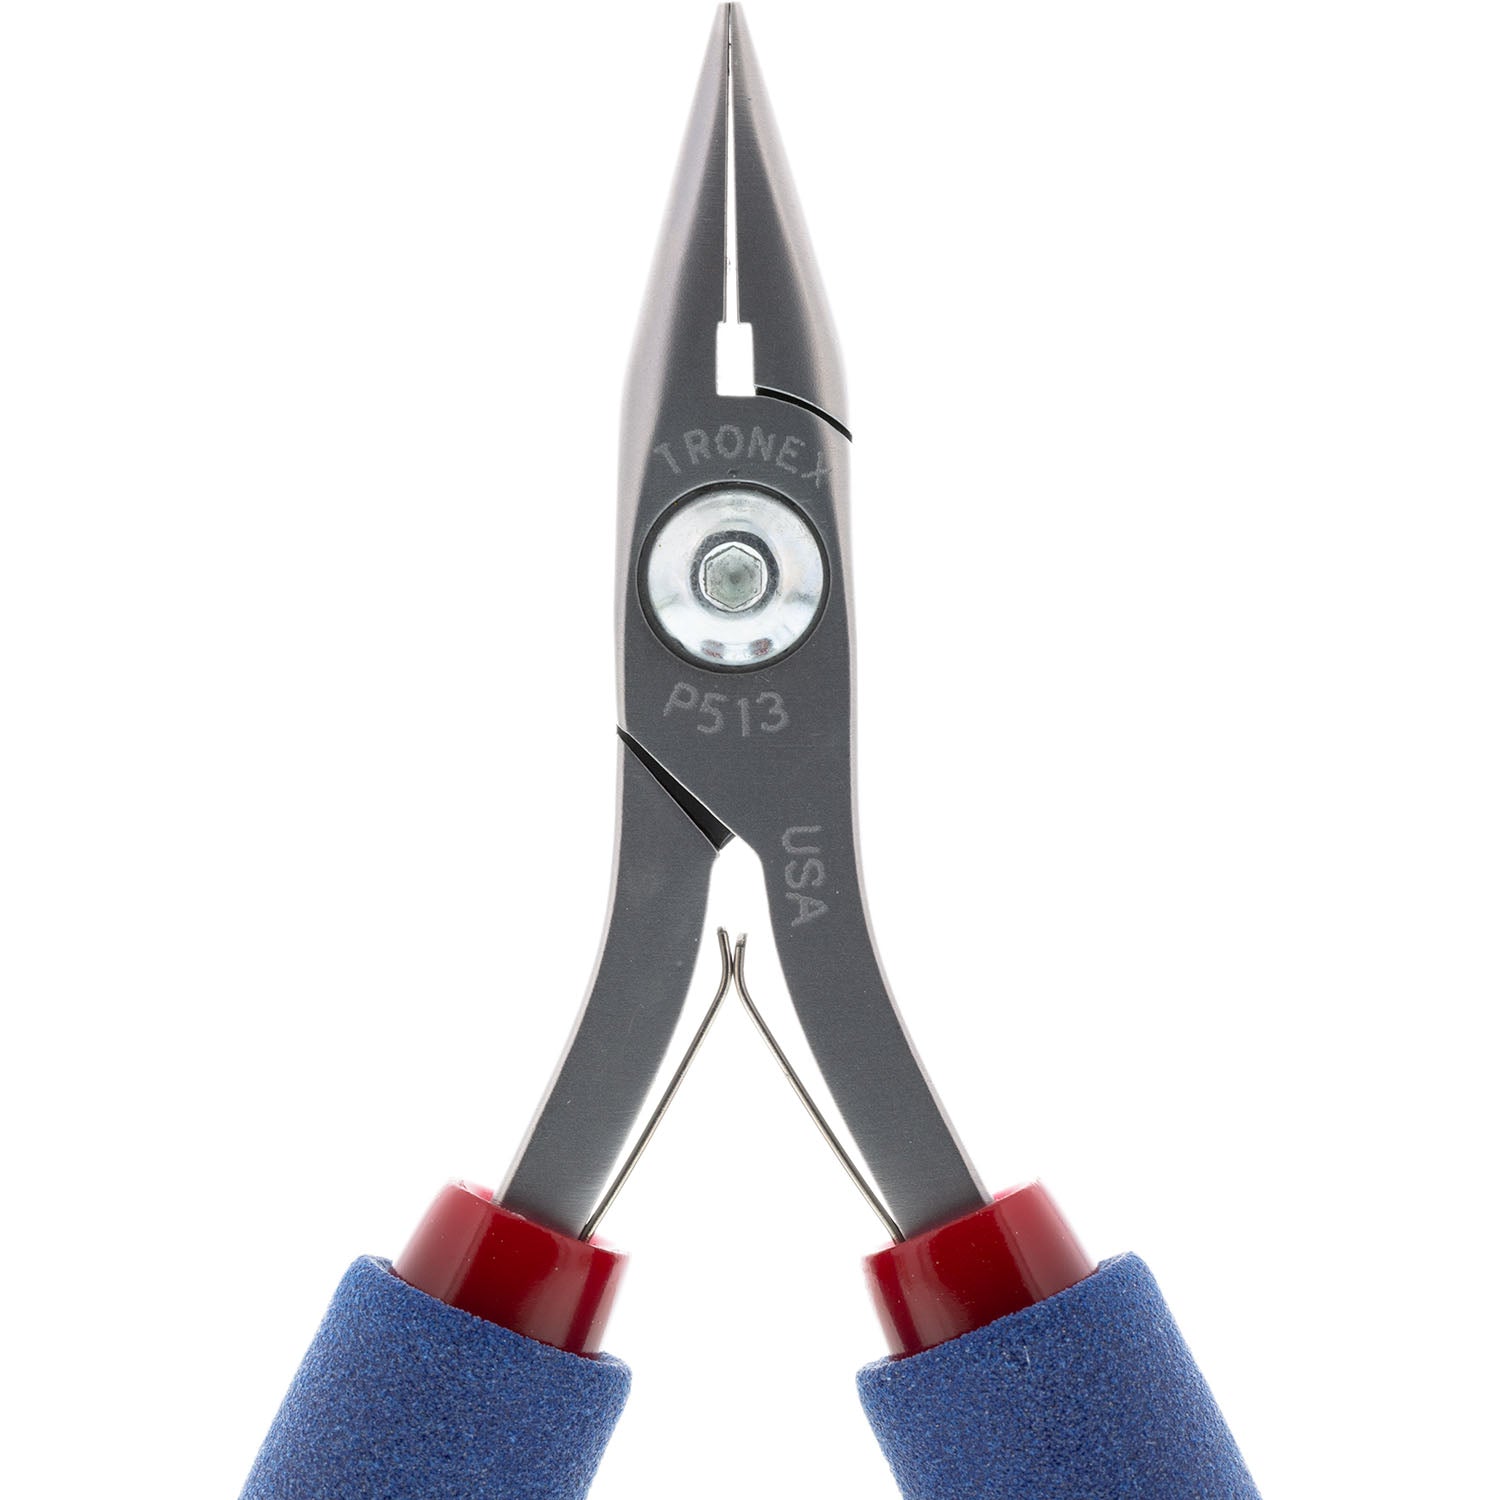 Tronex P713S Chain Nose Pliers Short Jaw Serrated